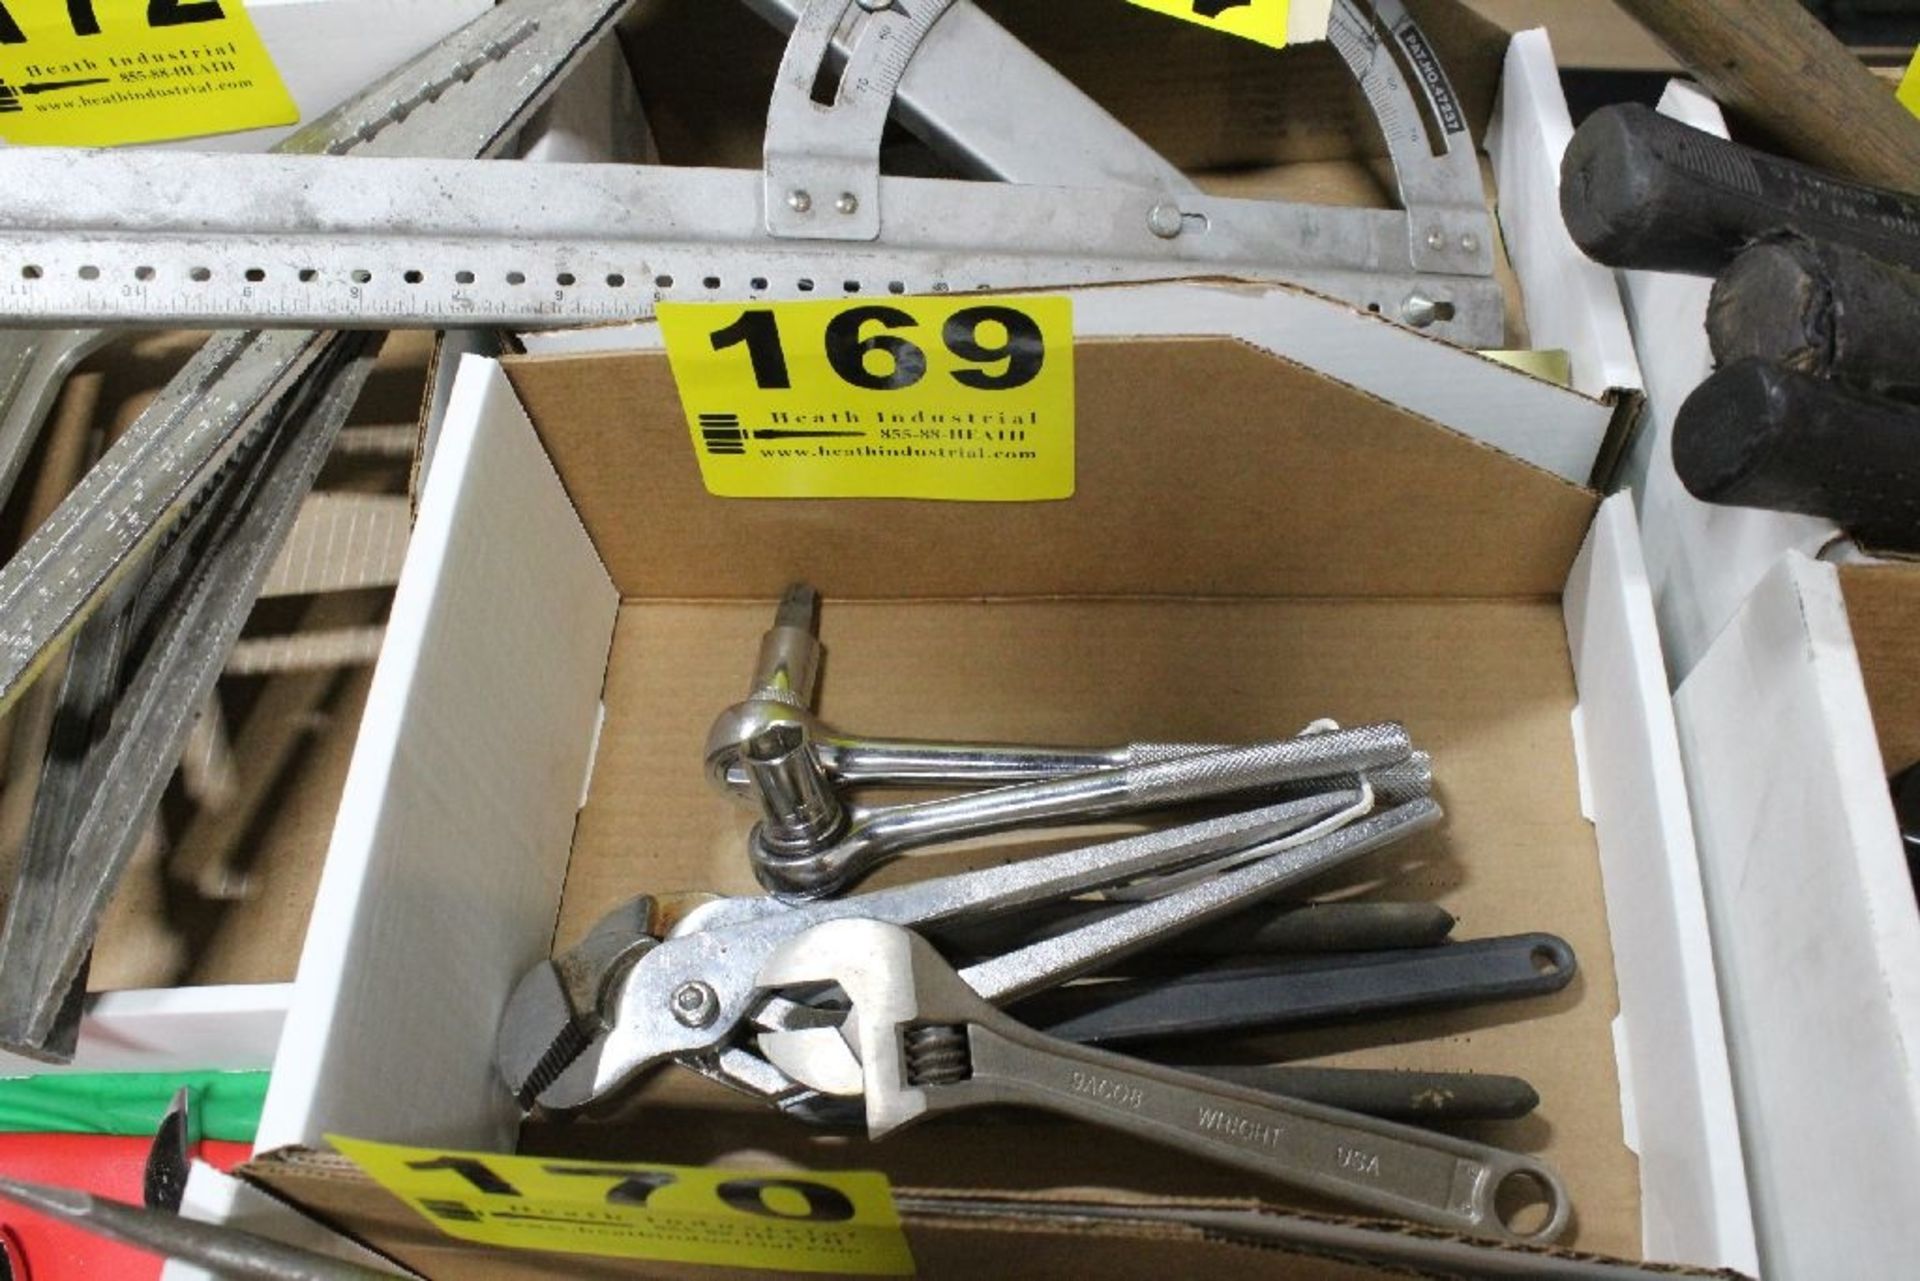 ASSORTED SOCKET WRENCHS, PLIERS, AND WRENCHES